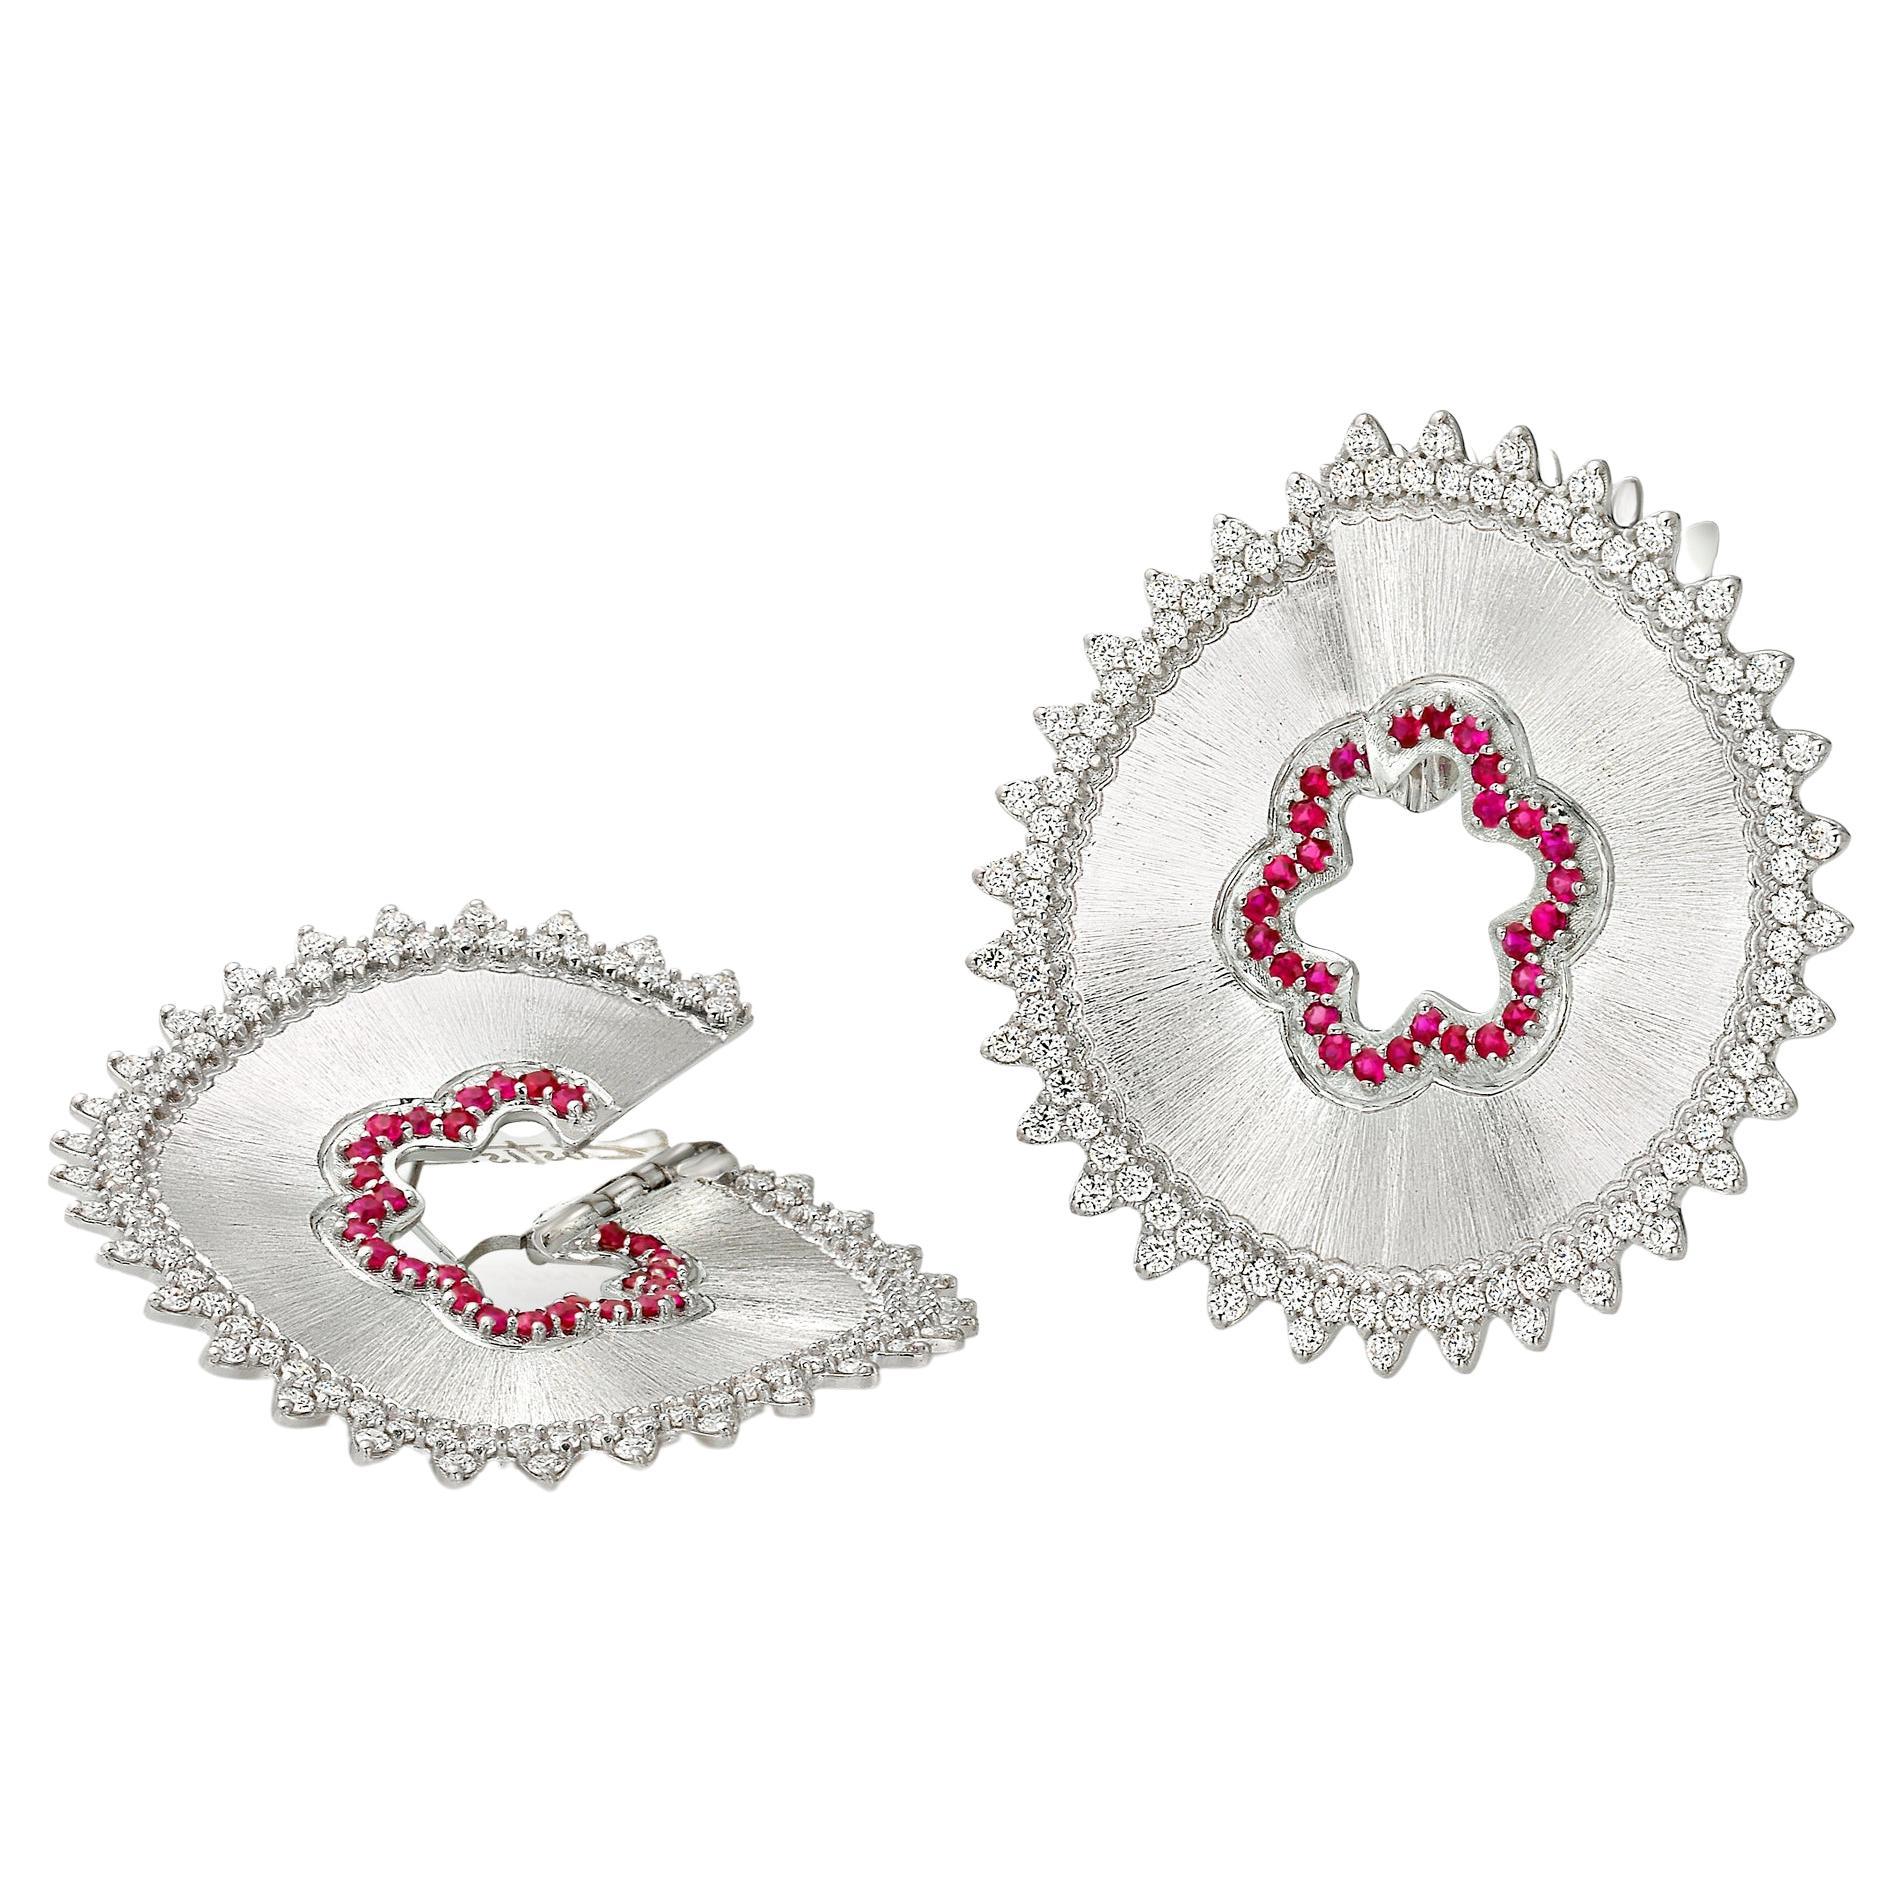 "Costis" Pencil Collection Earrings, with Diamonds and Burmese Rubies For Sale